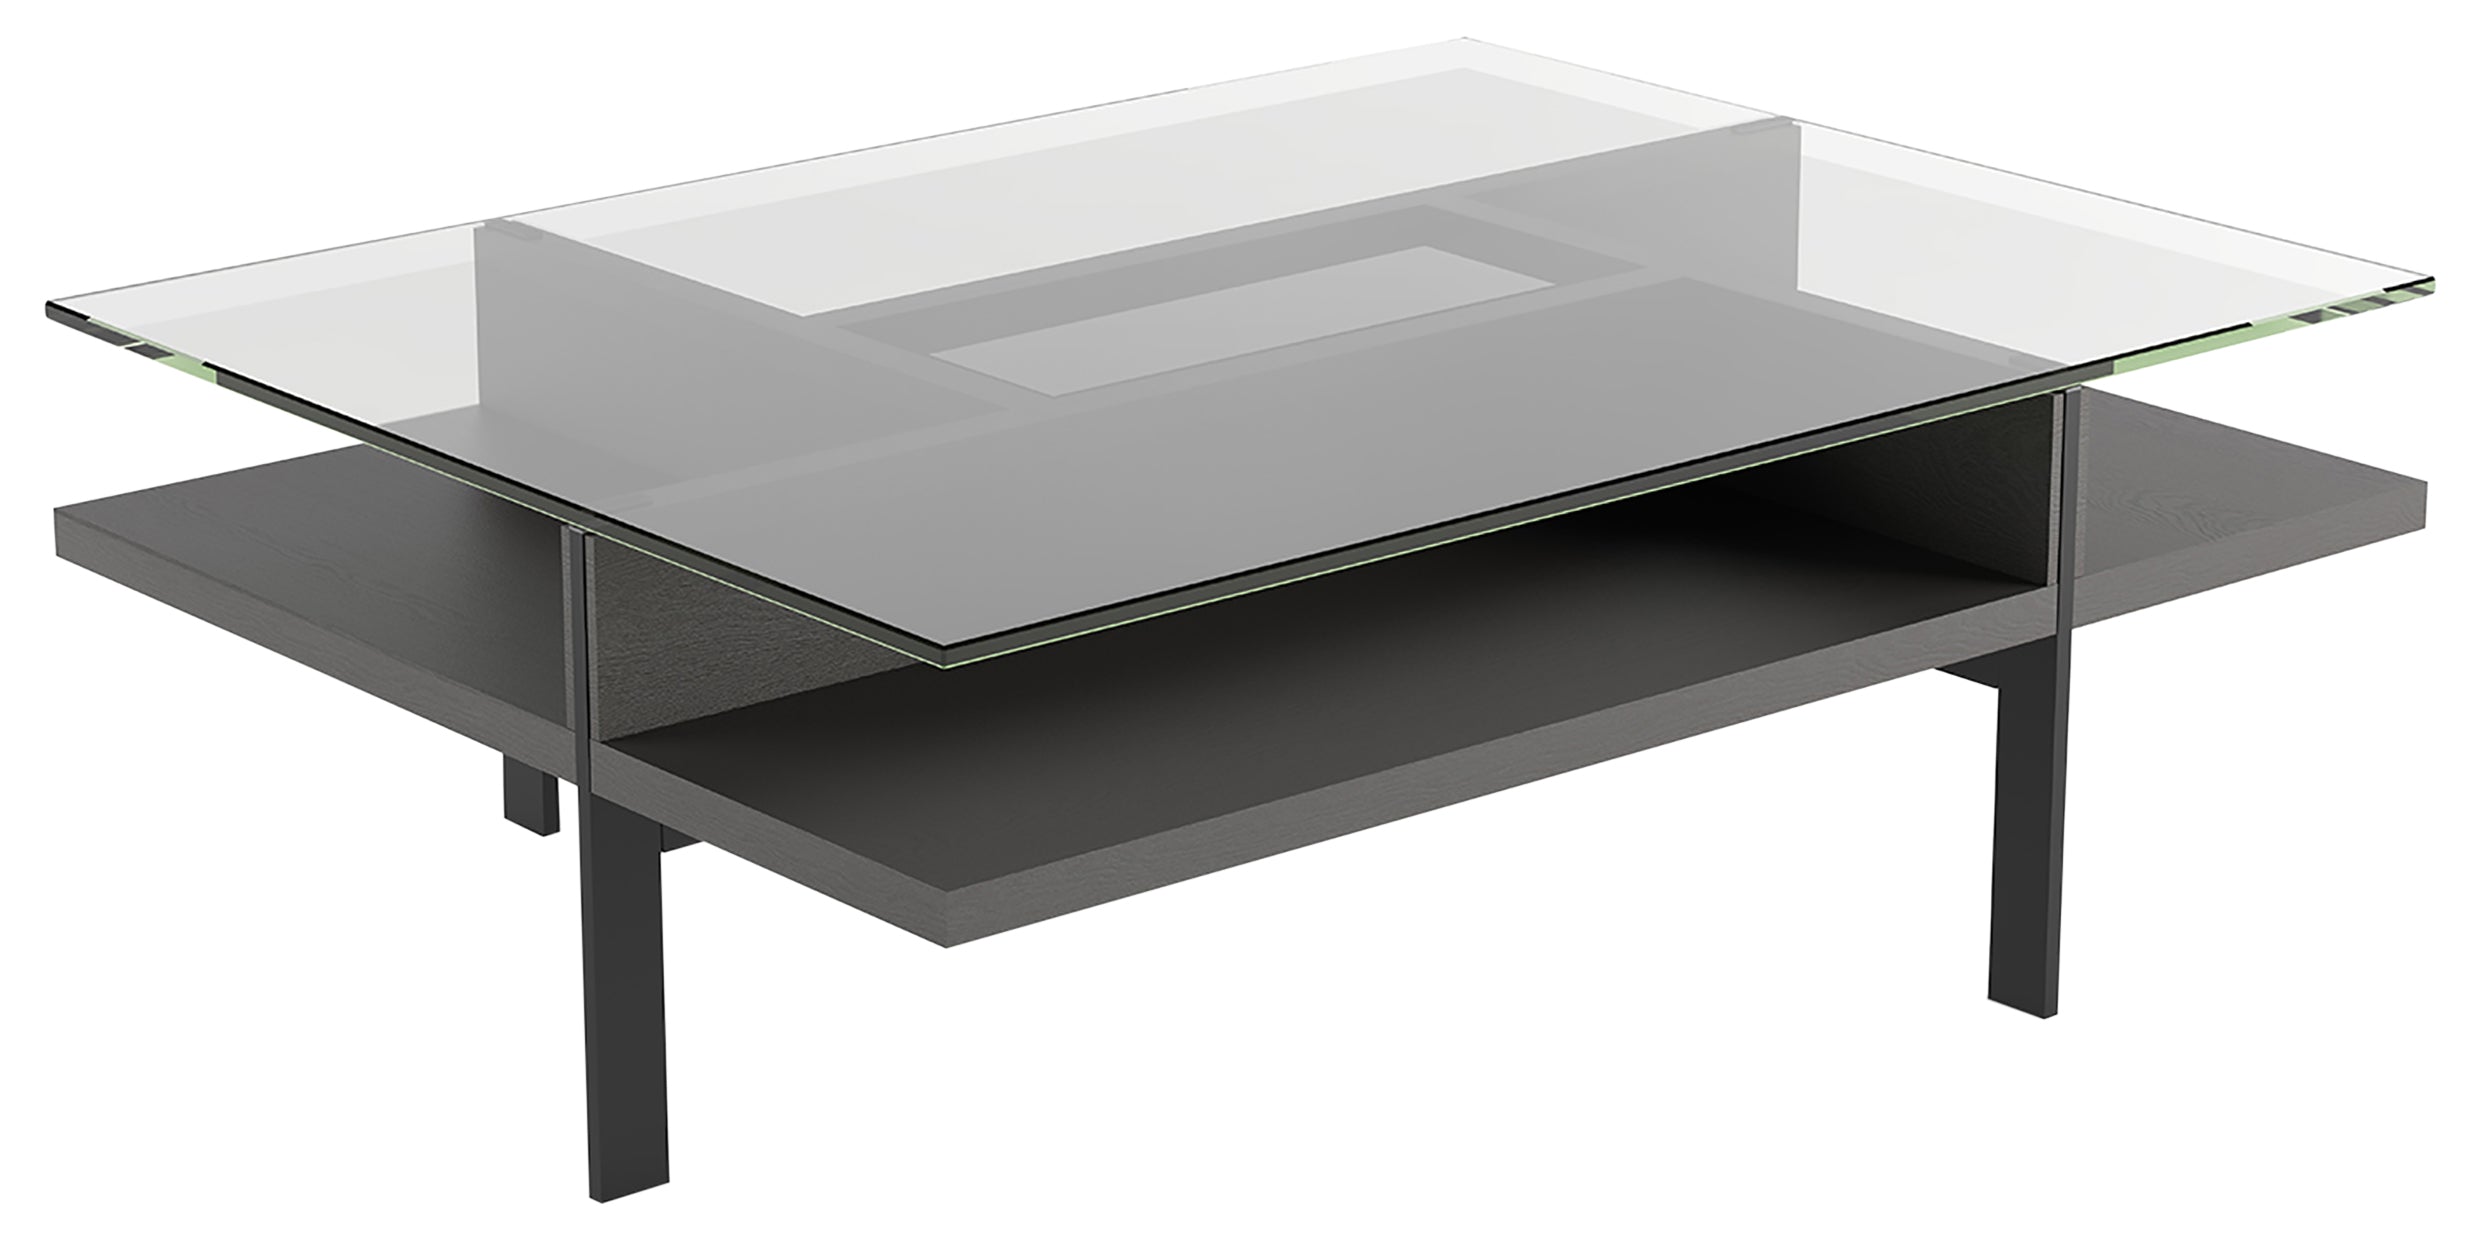 Charcoal Ash Veneer &amp; Polished Tempered Glass with Black Aluminum | BDI Terrace Rectangular Coffee Table | Valley Ridge Furniture